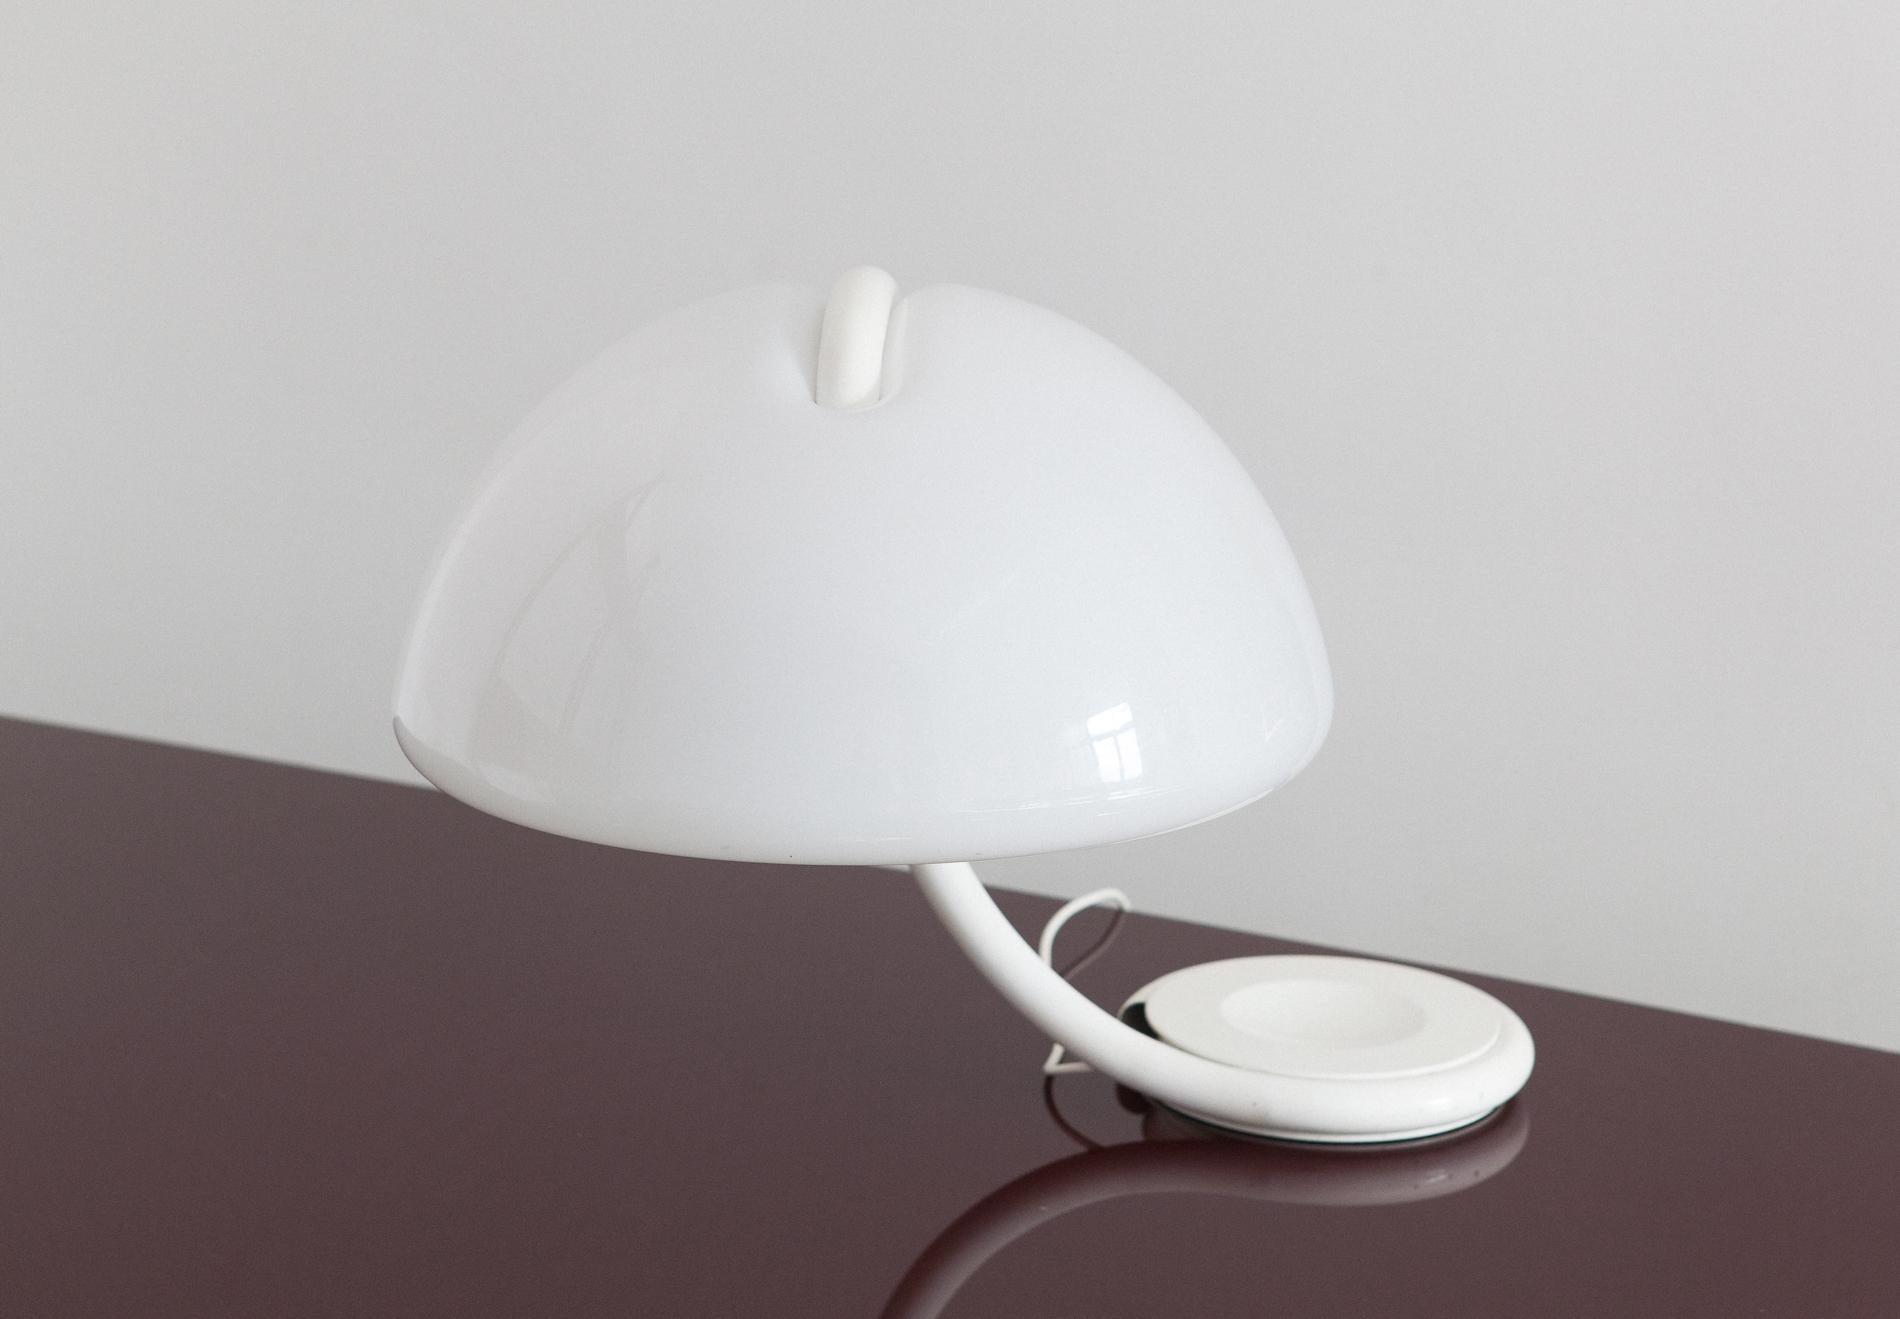 Mod. 599 ''Serpente'' swivelling desk lamp designed by Elio Martinelli and produced by Martinelli Luce in Italy since 1965.
This table light consists of white enameled metal and a white plexiglass shade. The arm has a joint at the center that